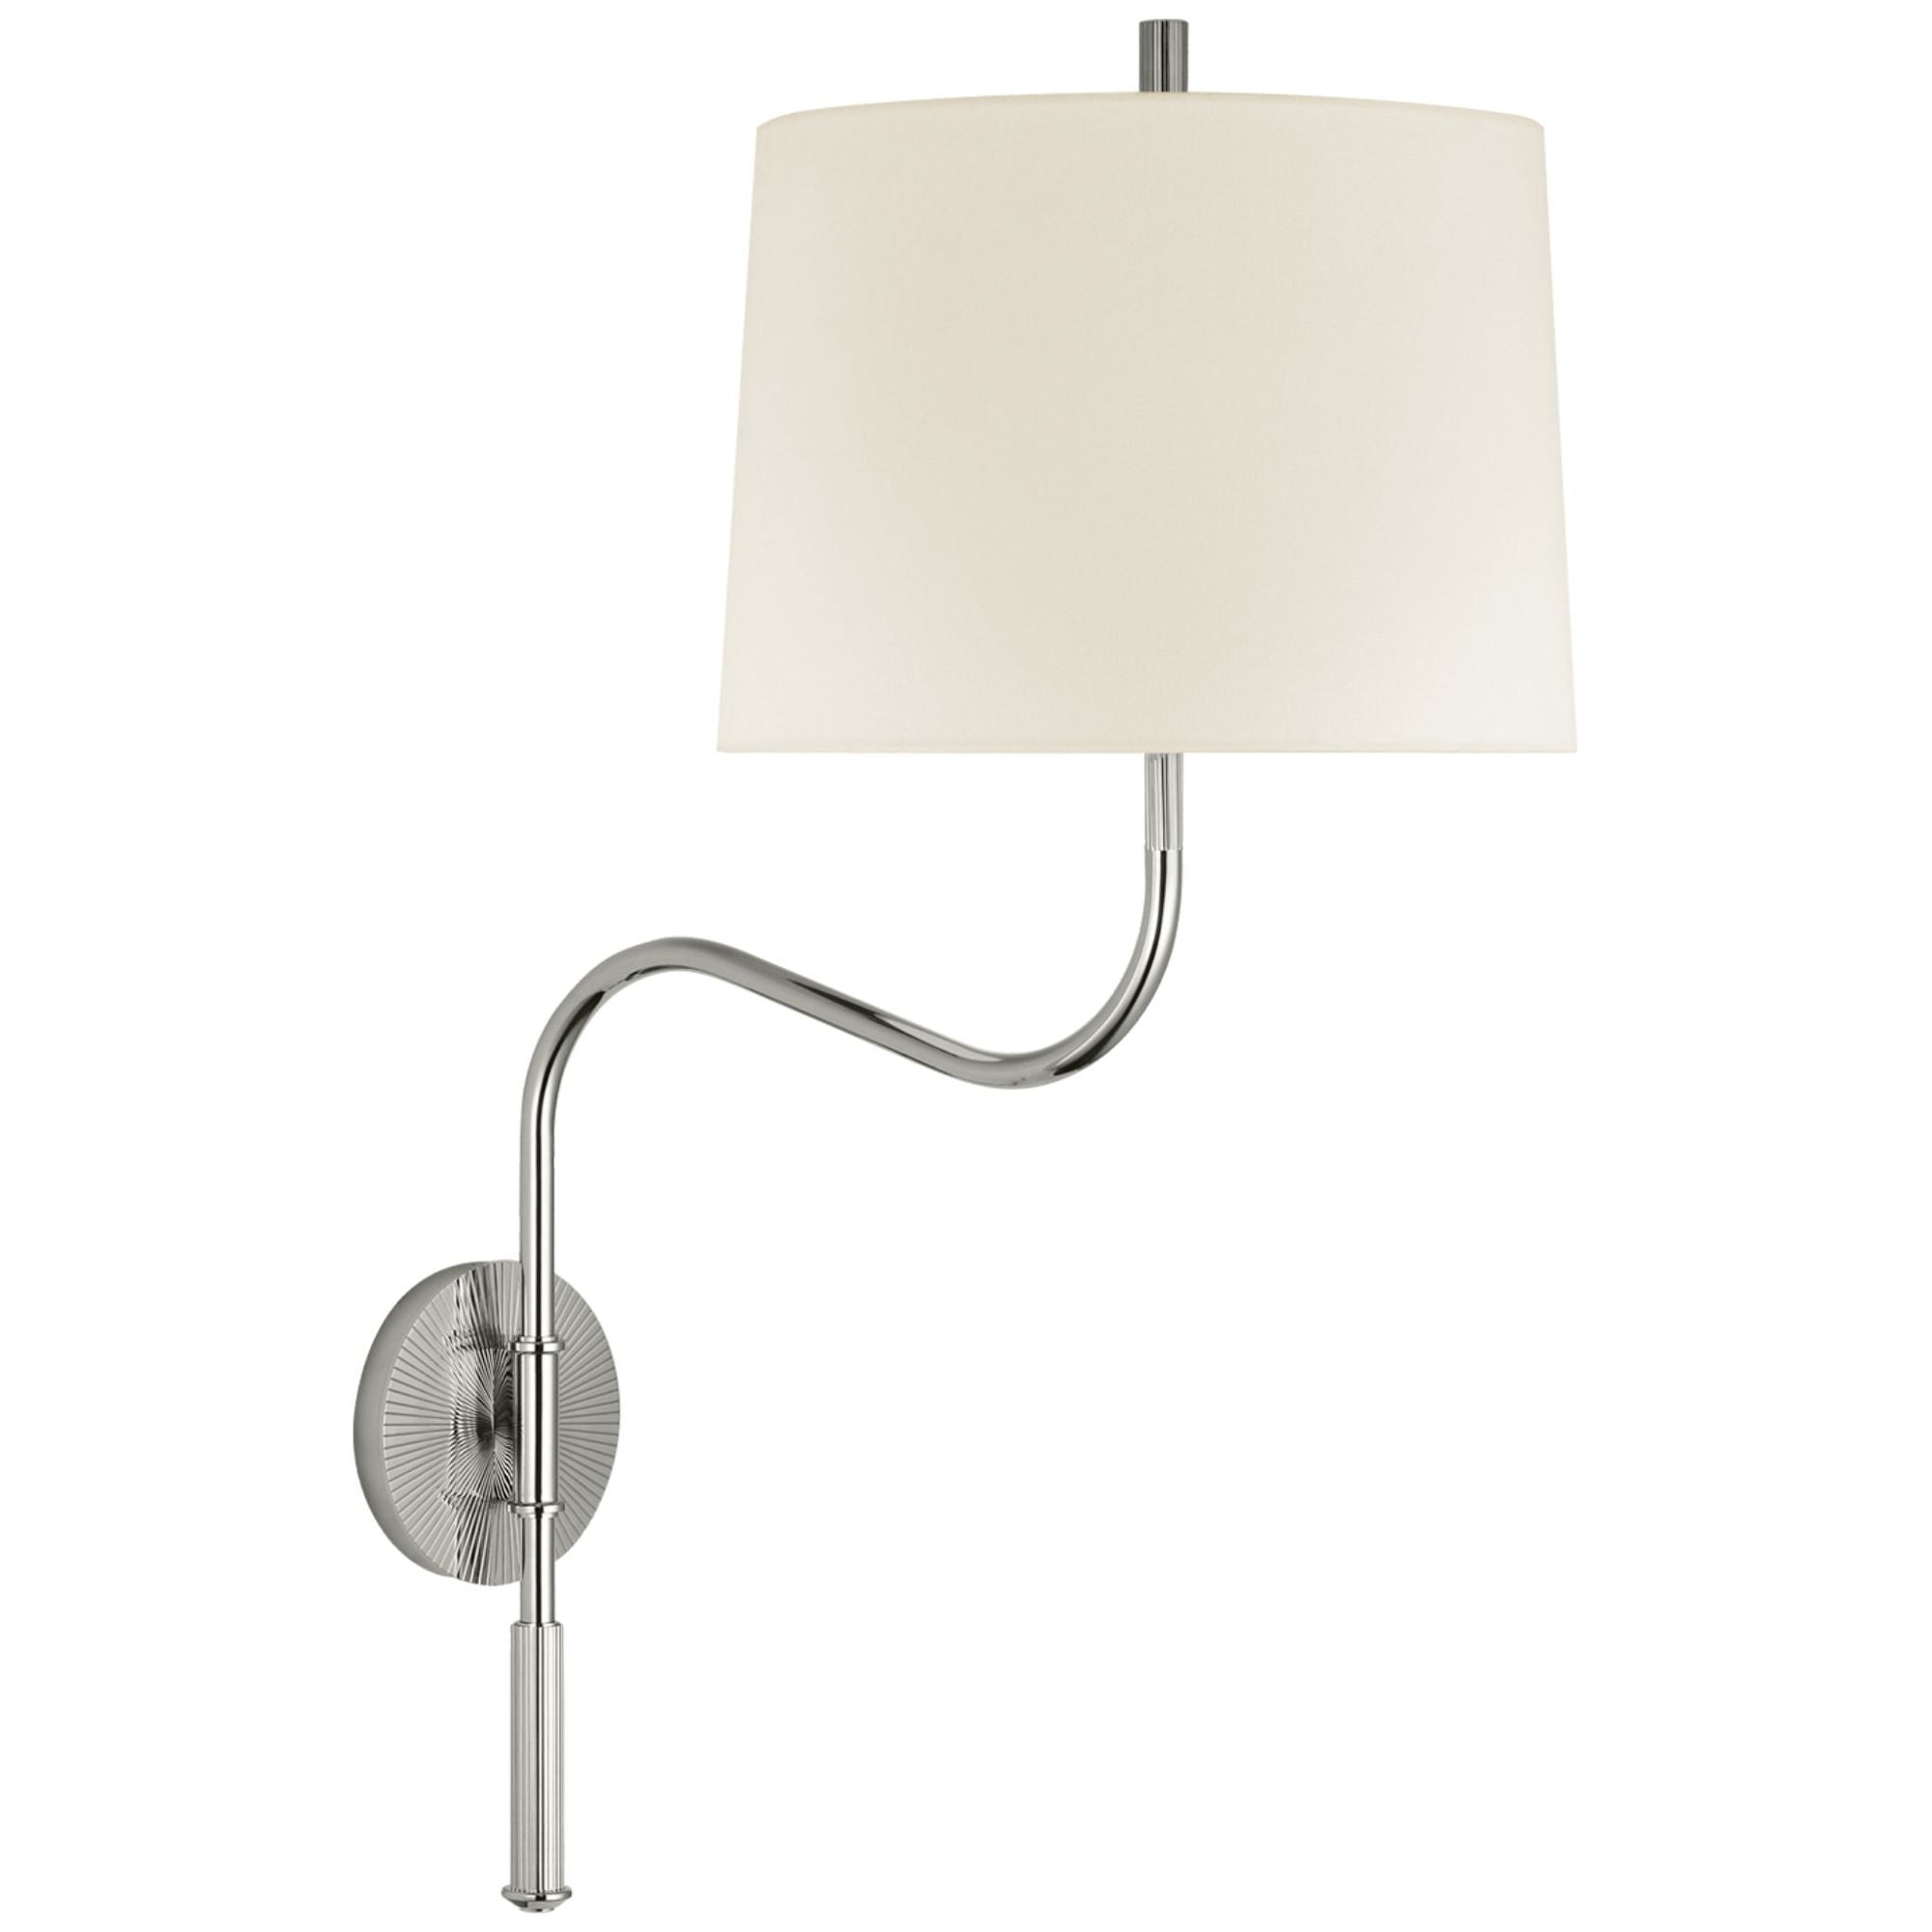 Thomas O'Brien Canto Medium Swinging Wall Light in Polished Nickel with Linen Shade